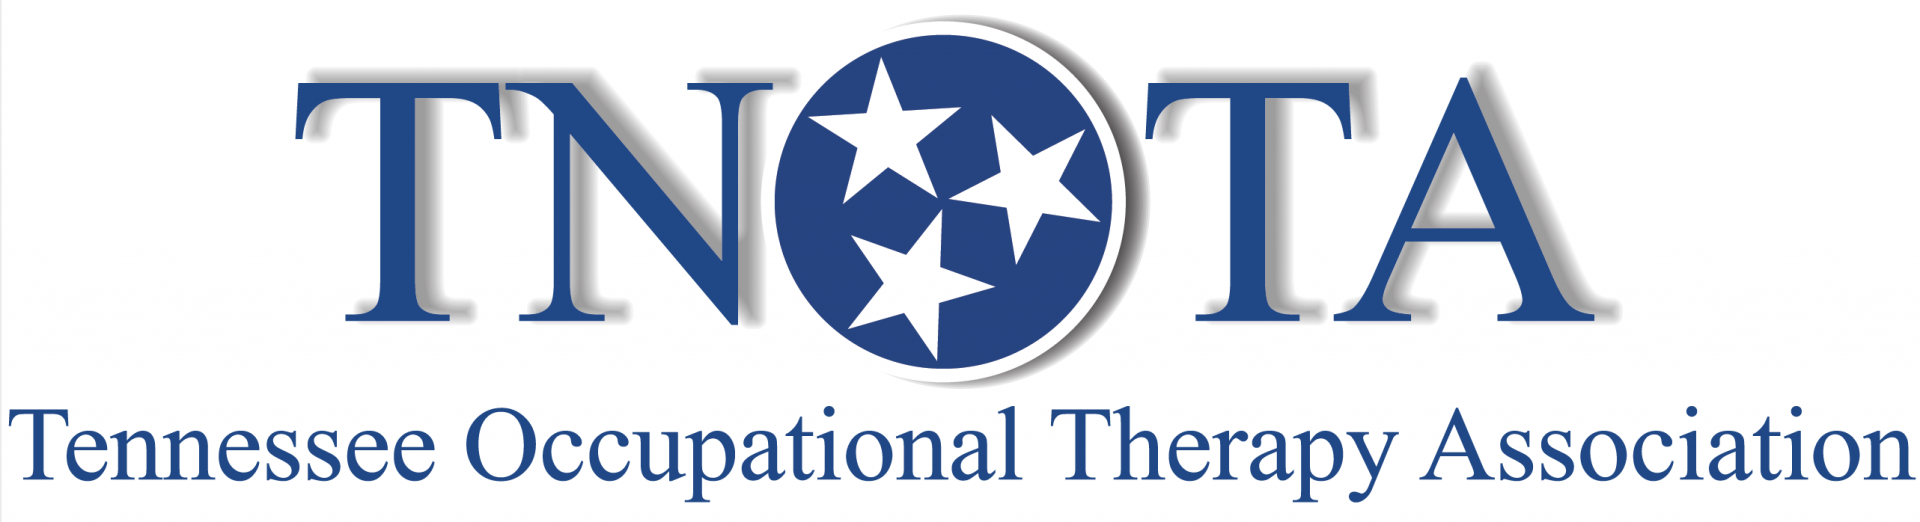  Graphic logo:white background, large blue  letters T, N, a solid blue circle with 3 whites stars, blue letters T, A.  Spells "TNOTA", below it in blue letters spell the words Tennessee Occupational Therapy Association